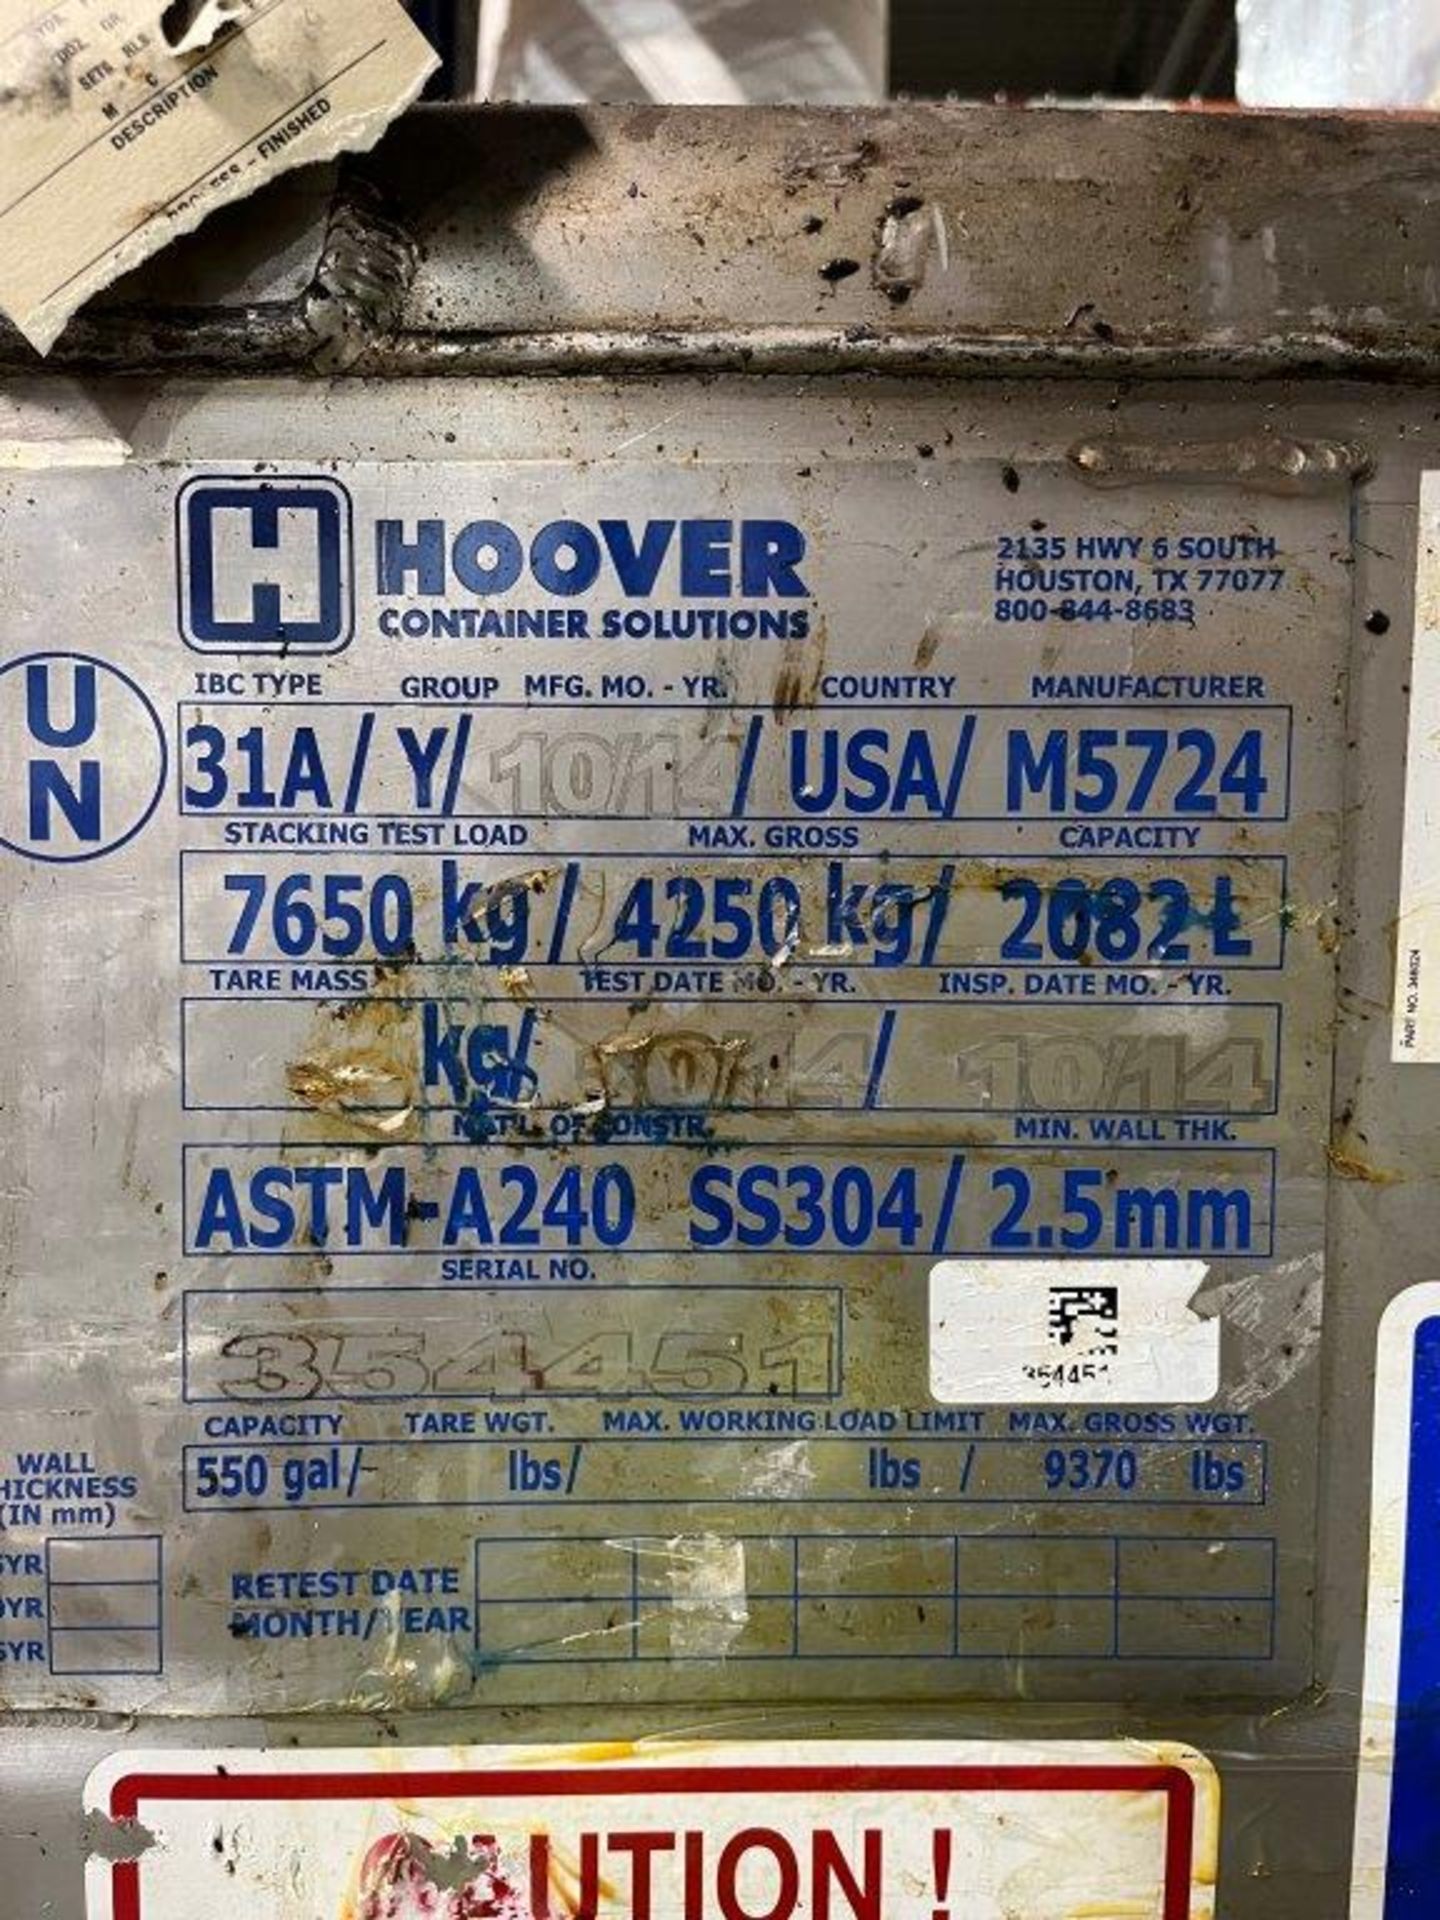 Hoover AATM A240 SS304/2.5mm 550-Gallon Capacity Tank - Image 2 of 2